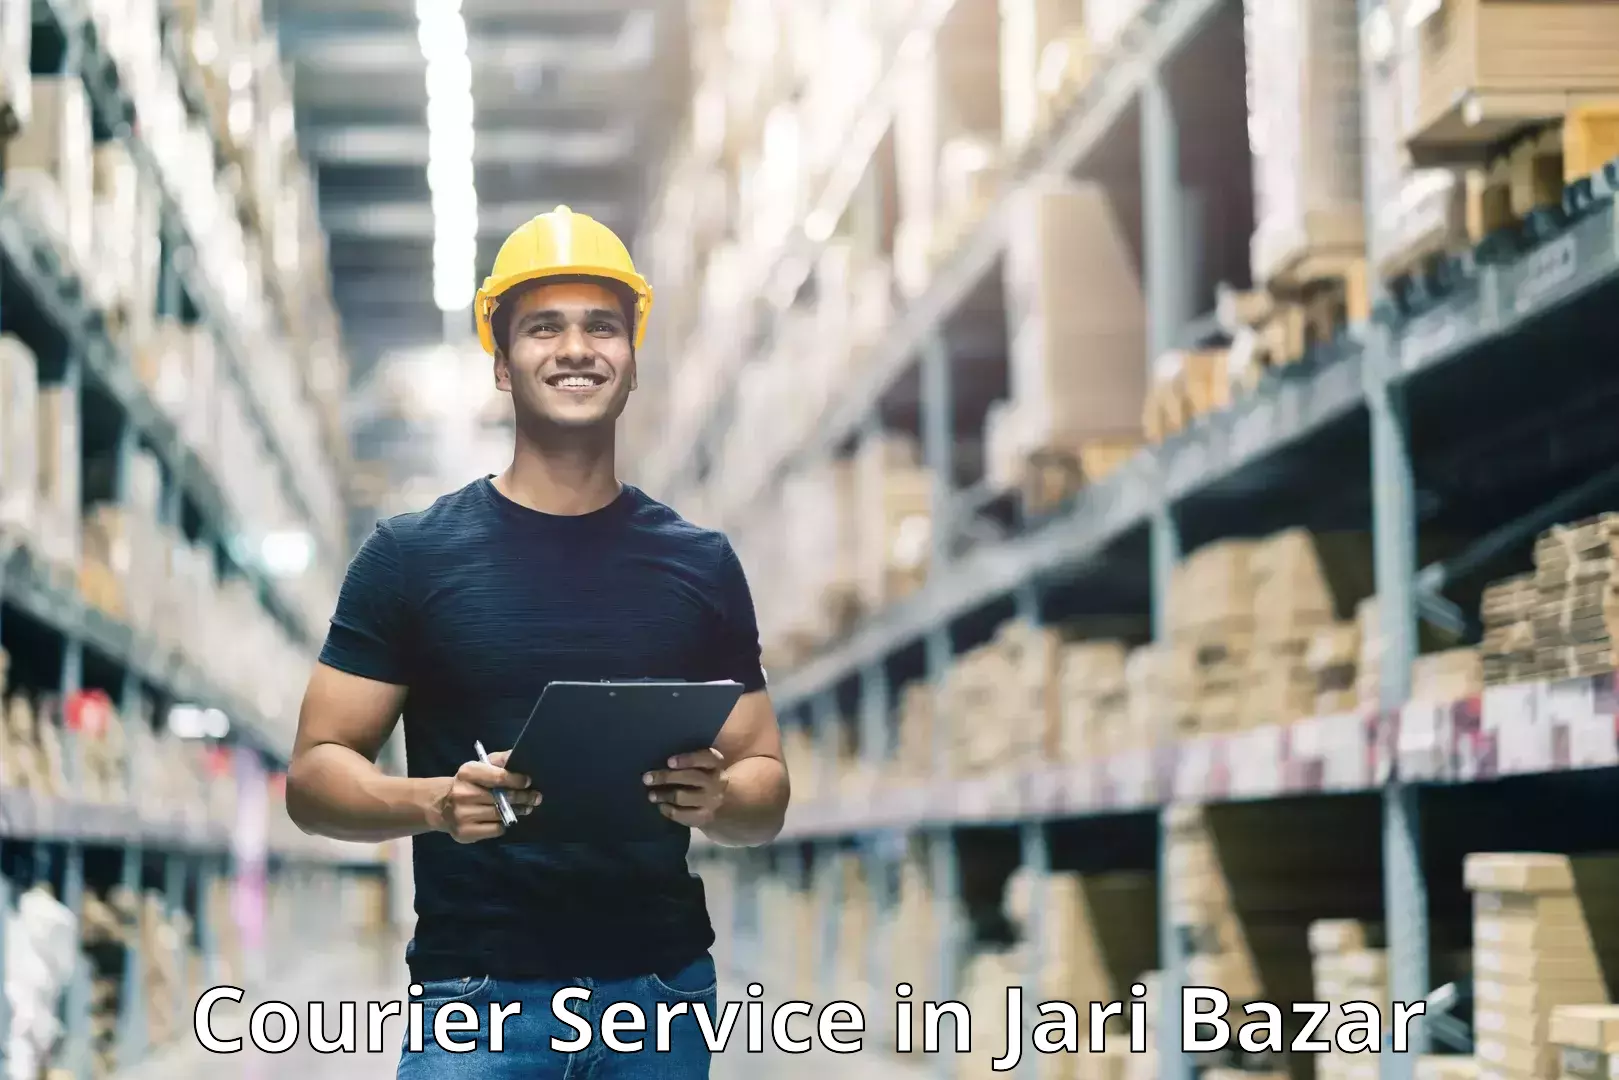 High-quality delivery services in Jari Bazar